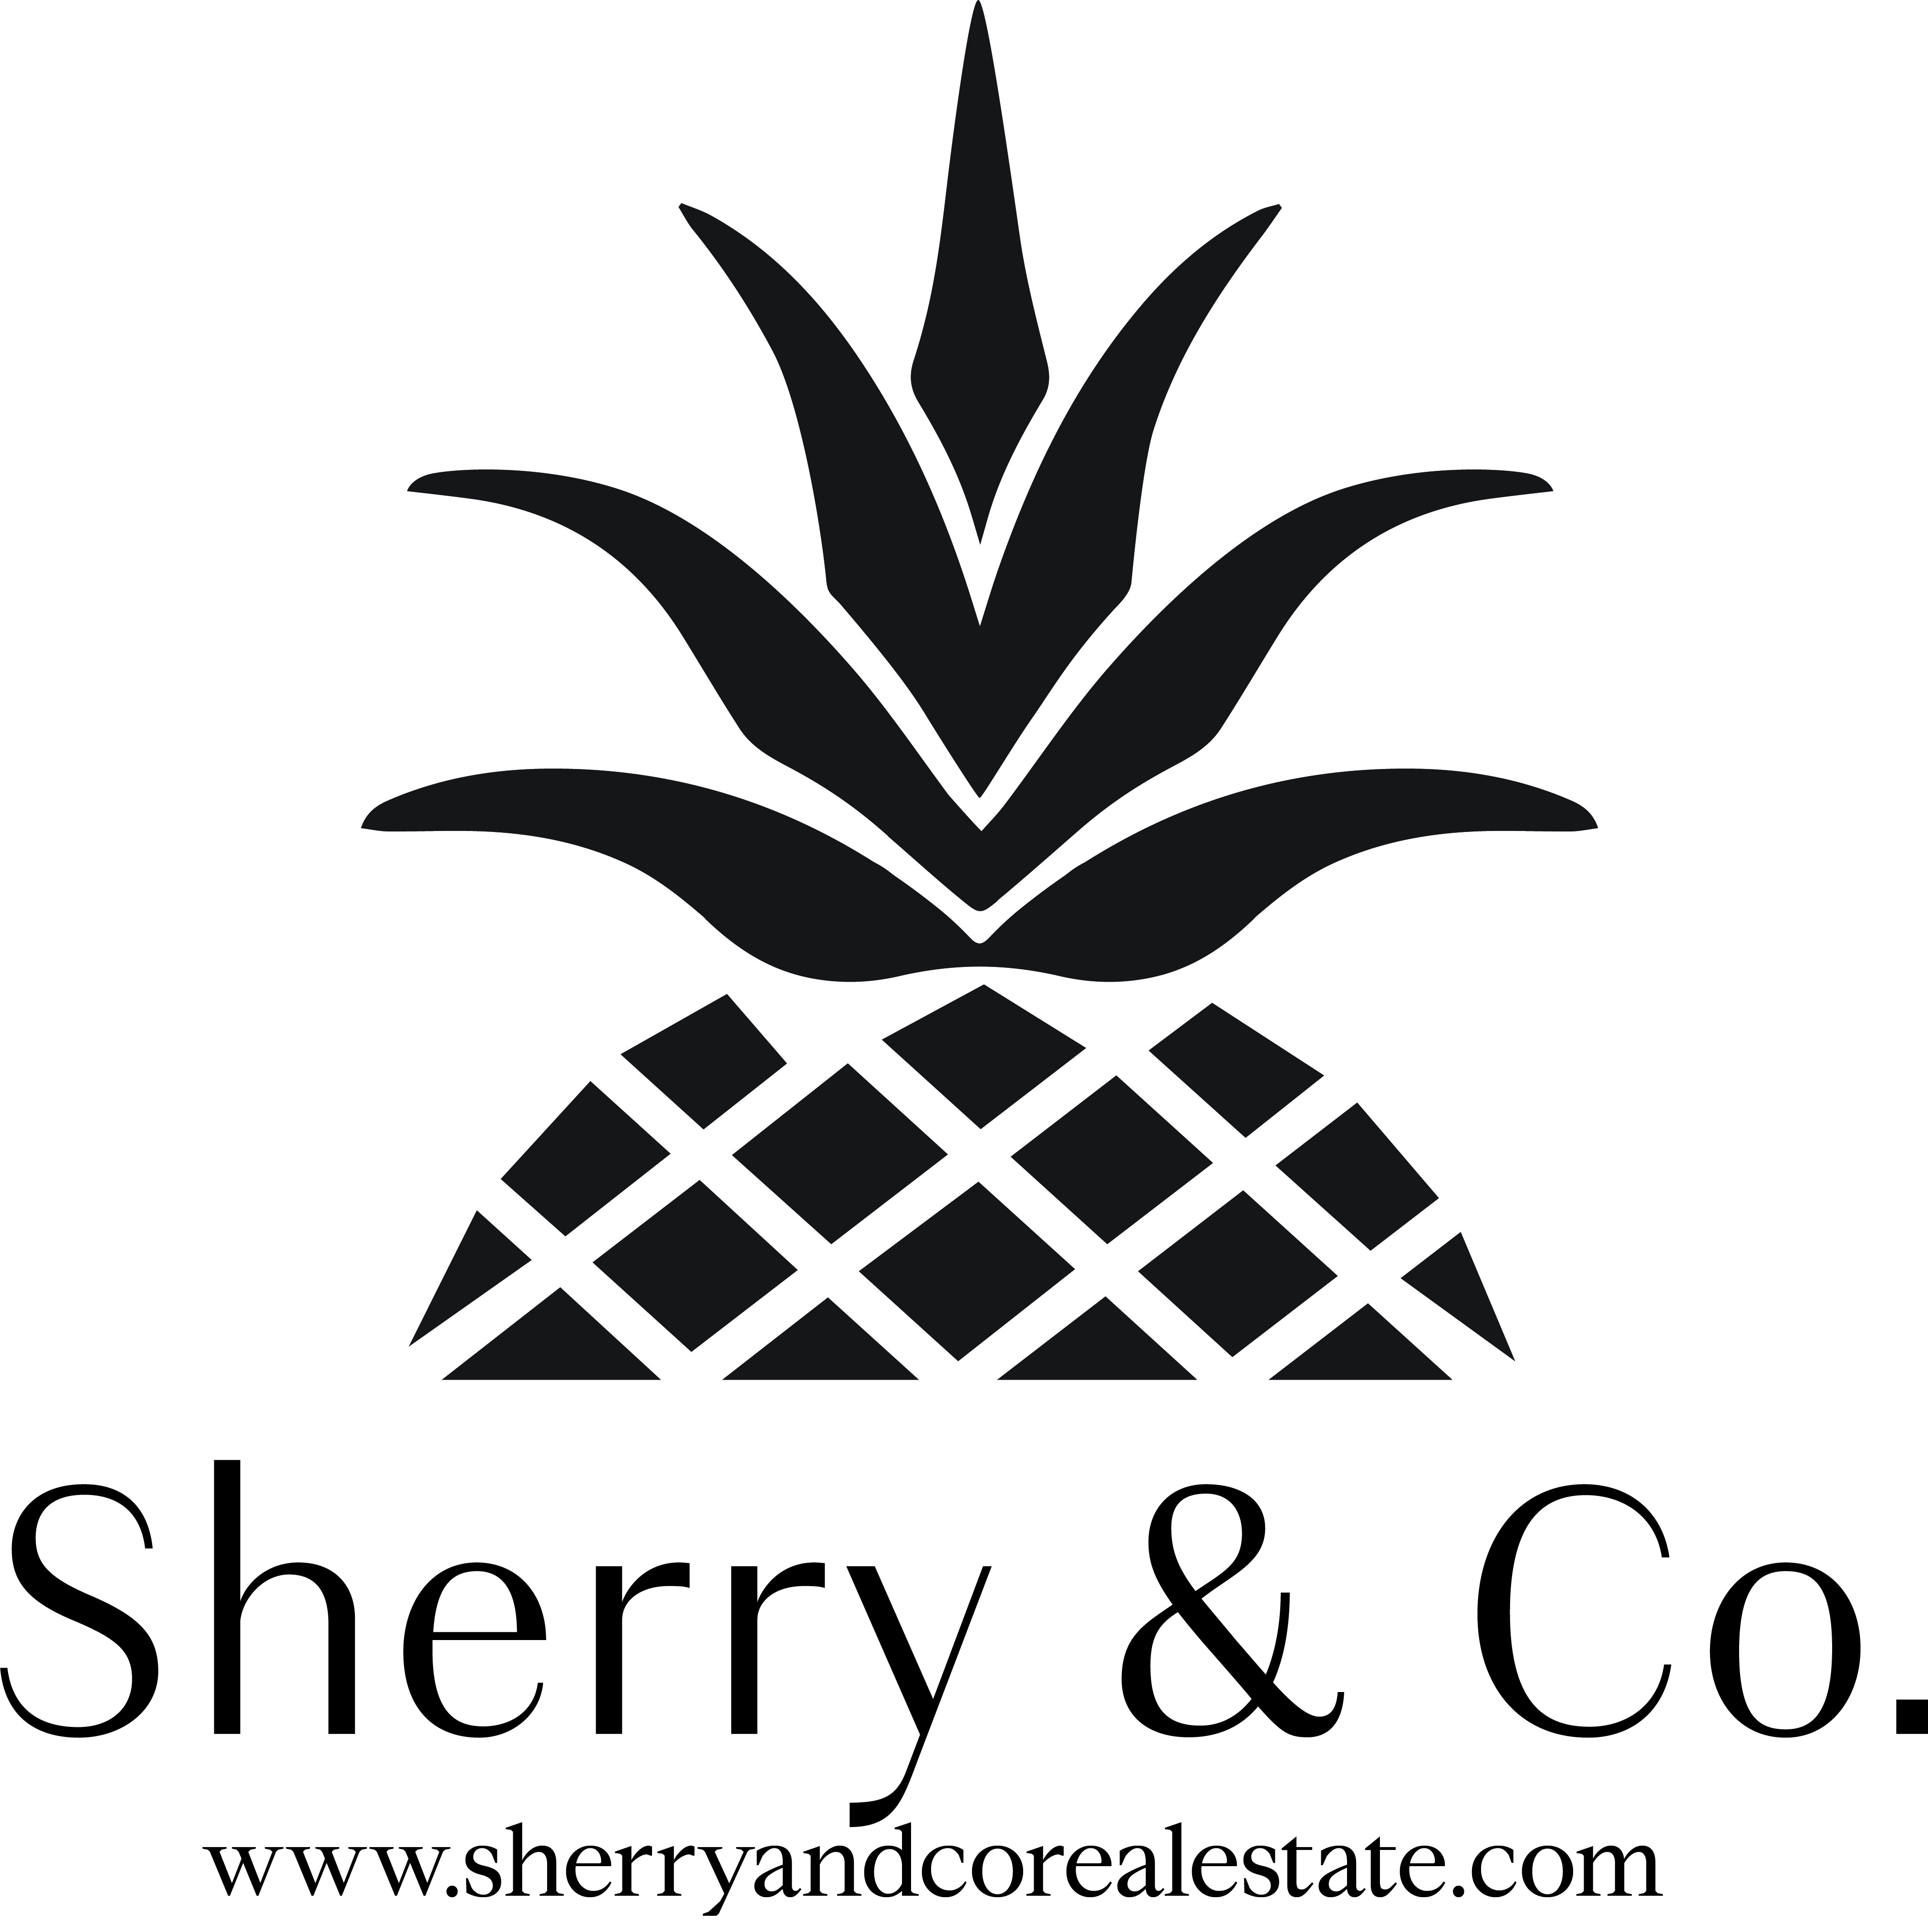 Sherry&Co